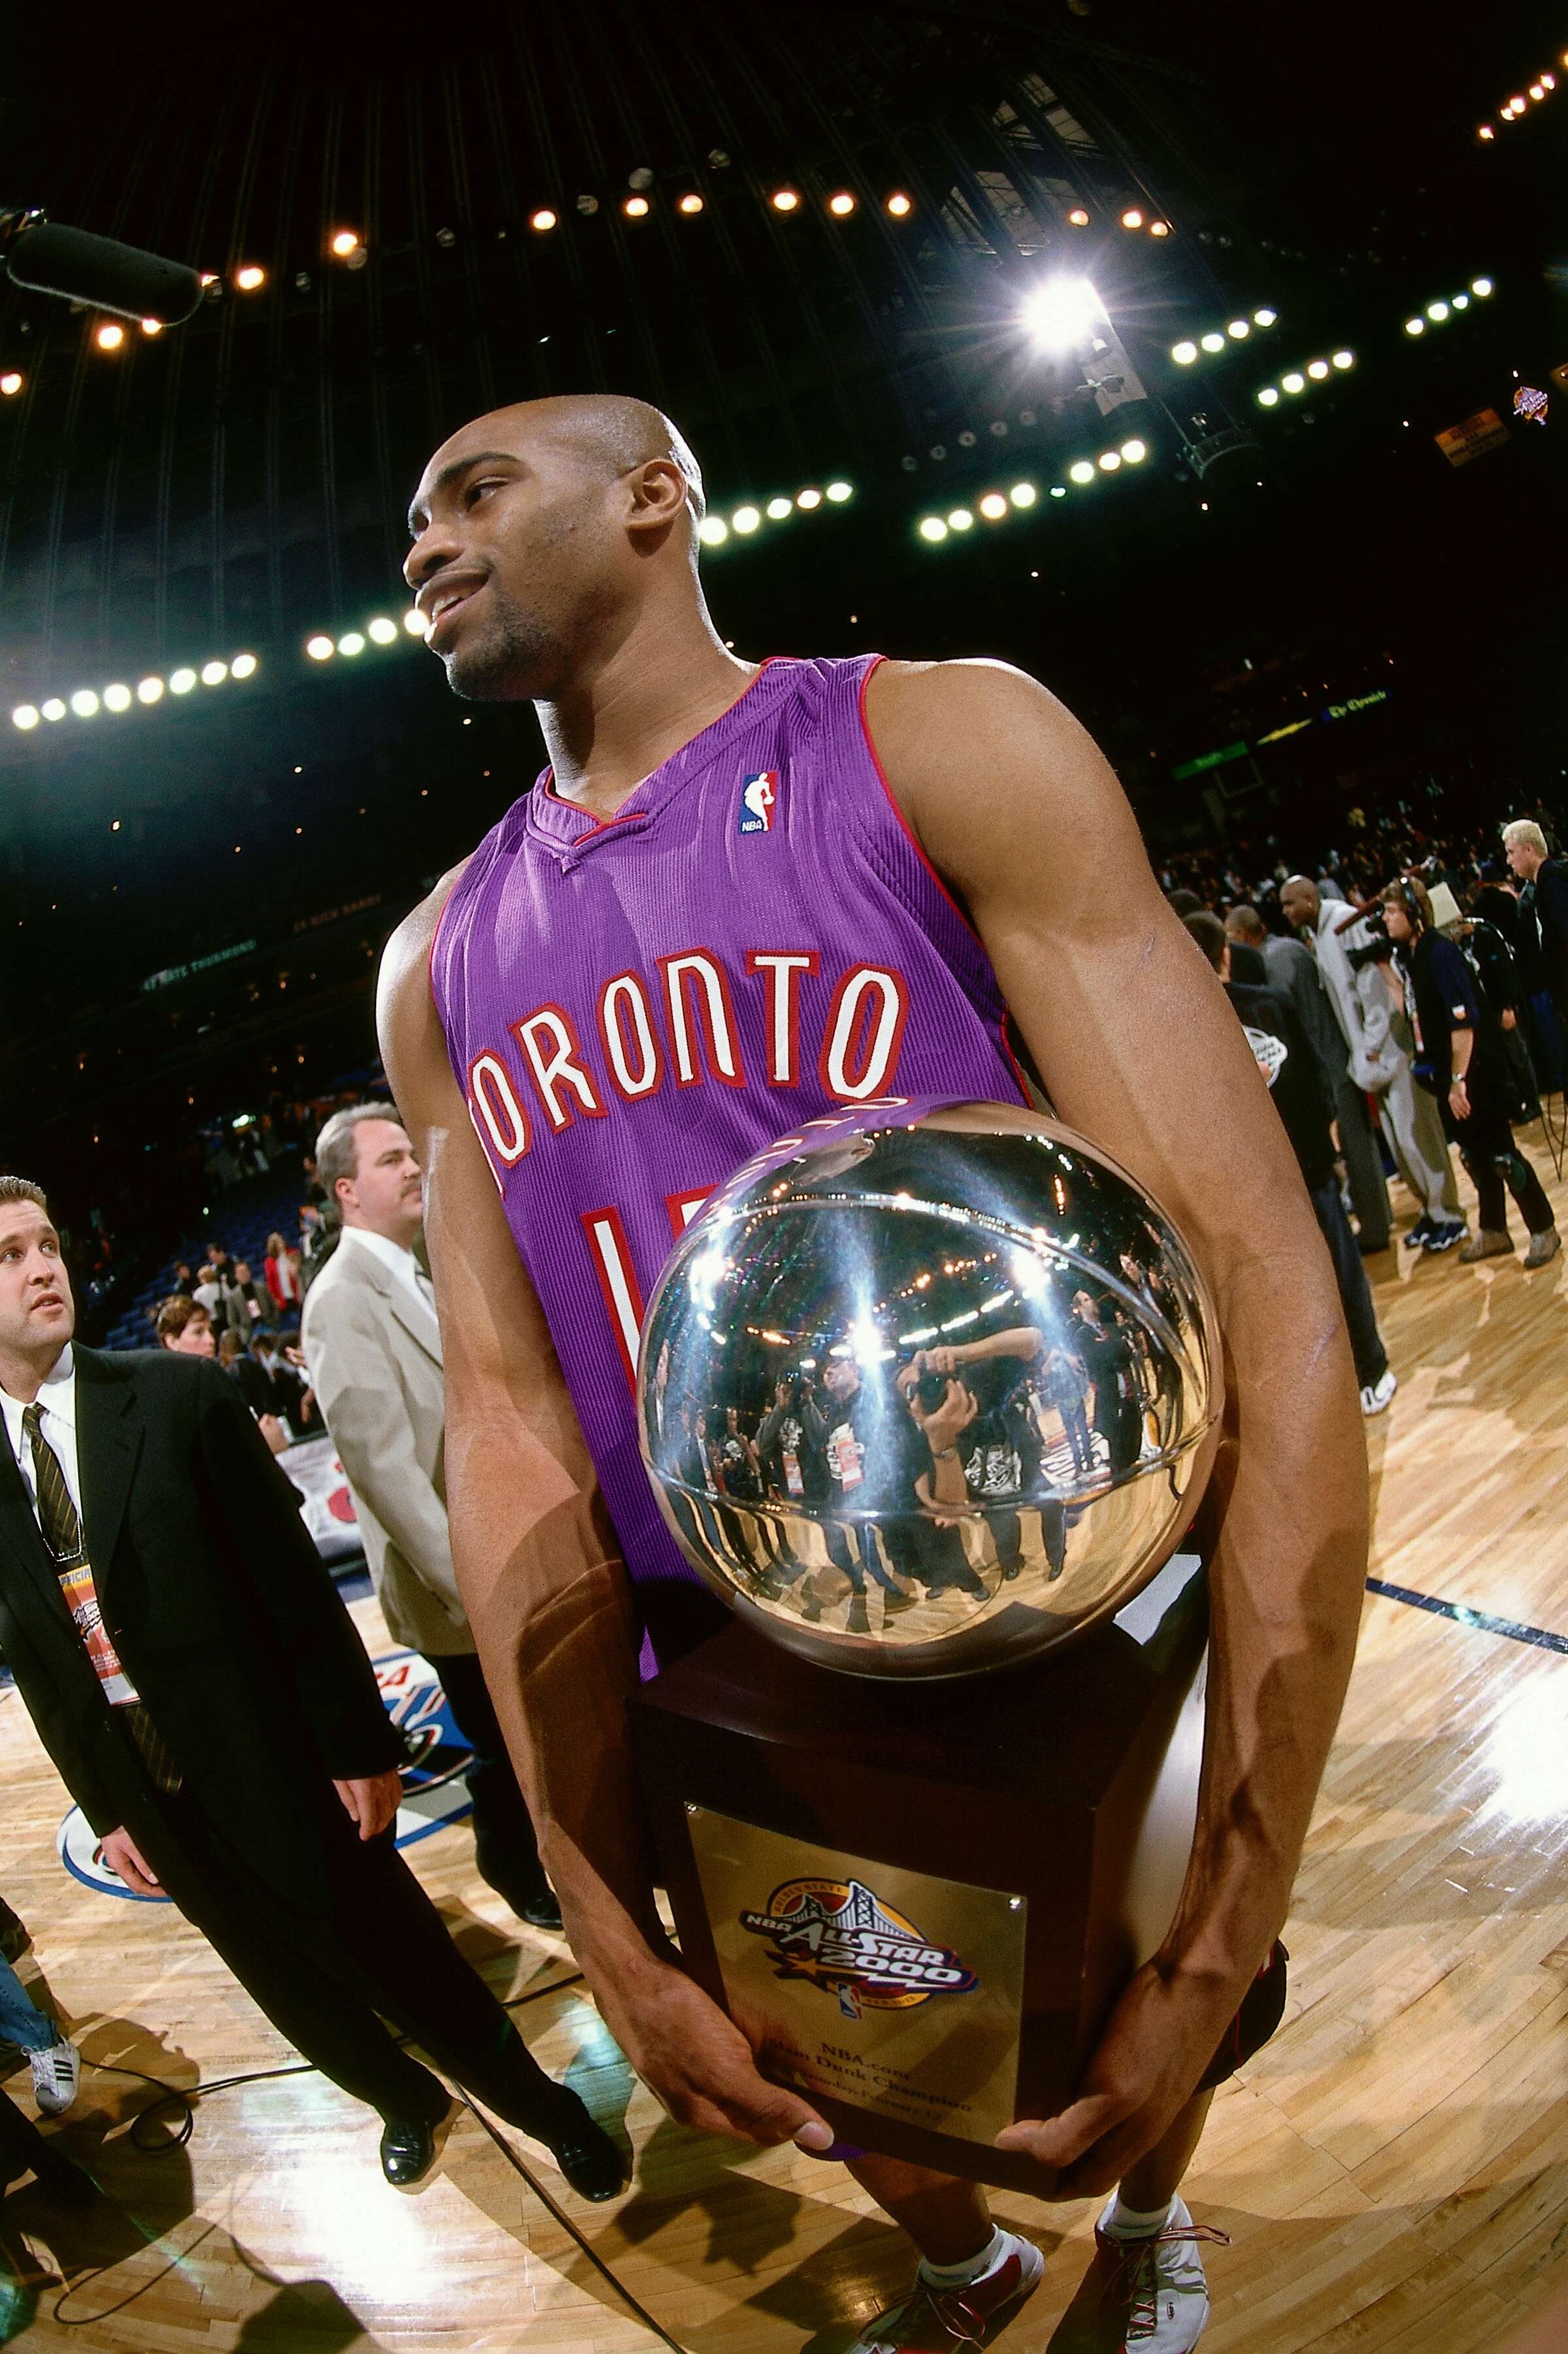 VIDEO: Celebrate the 20th Anniversary of Vince Carter Telling Us it's Over  at the 2000 Dunk Contest